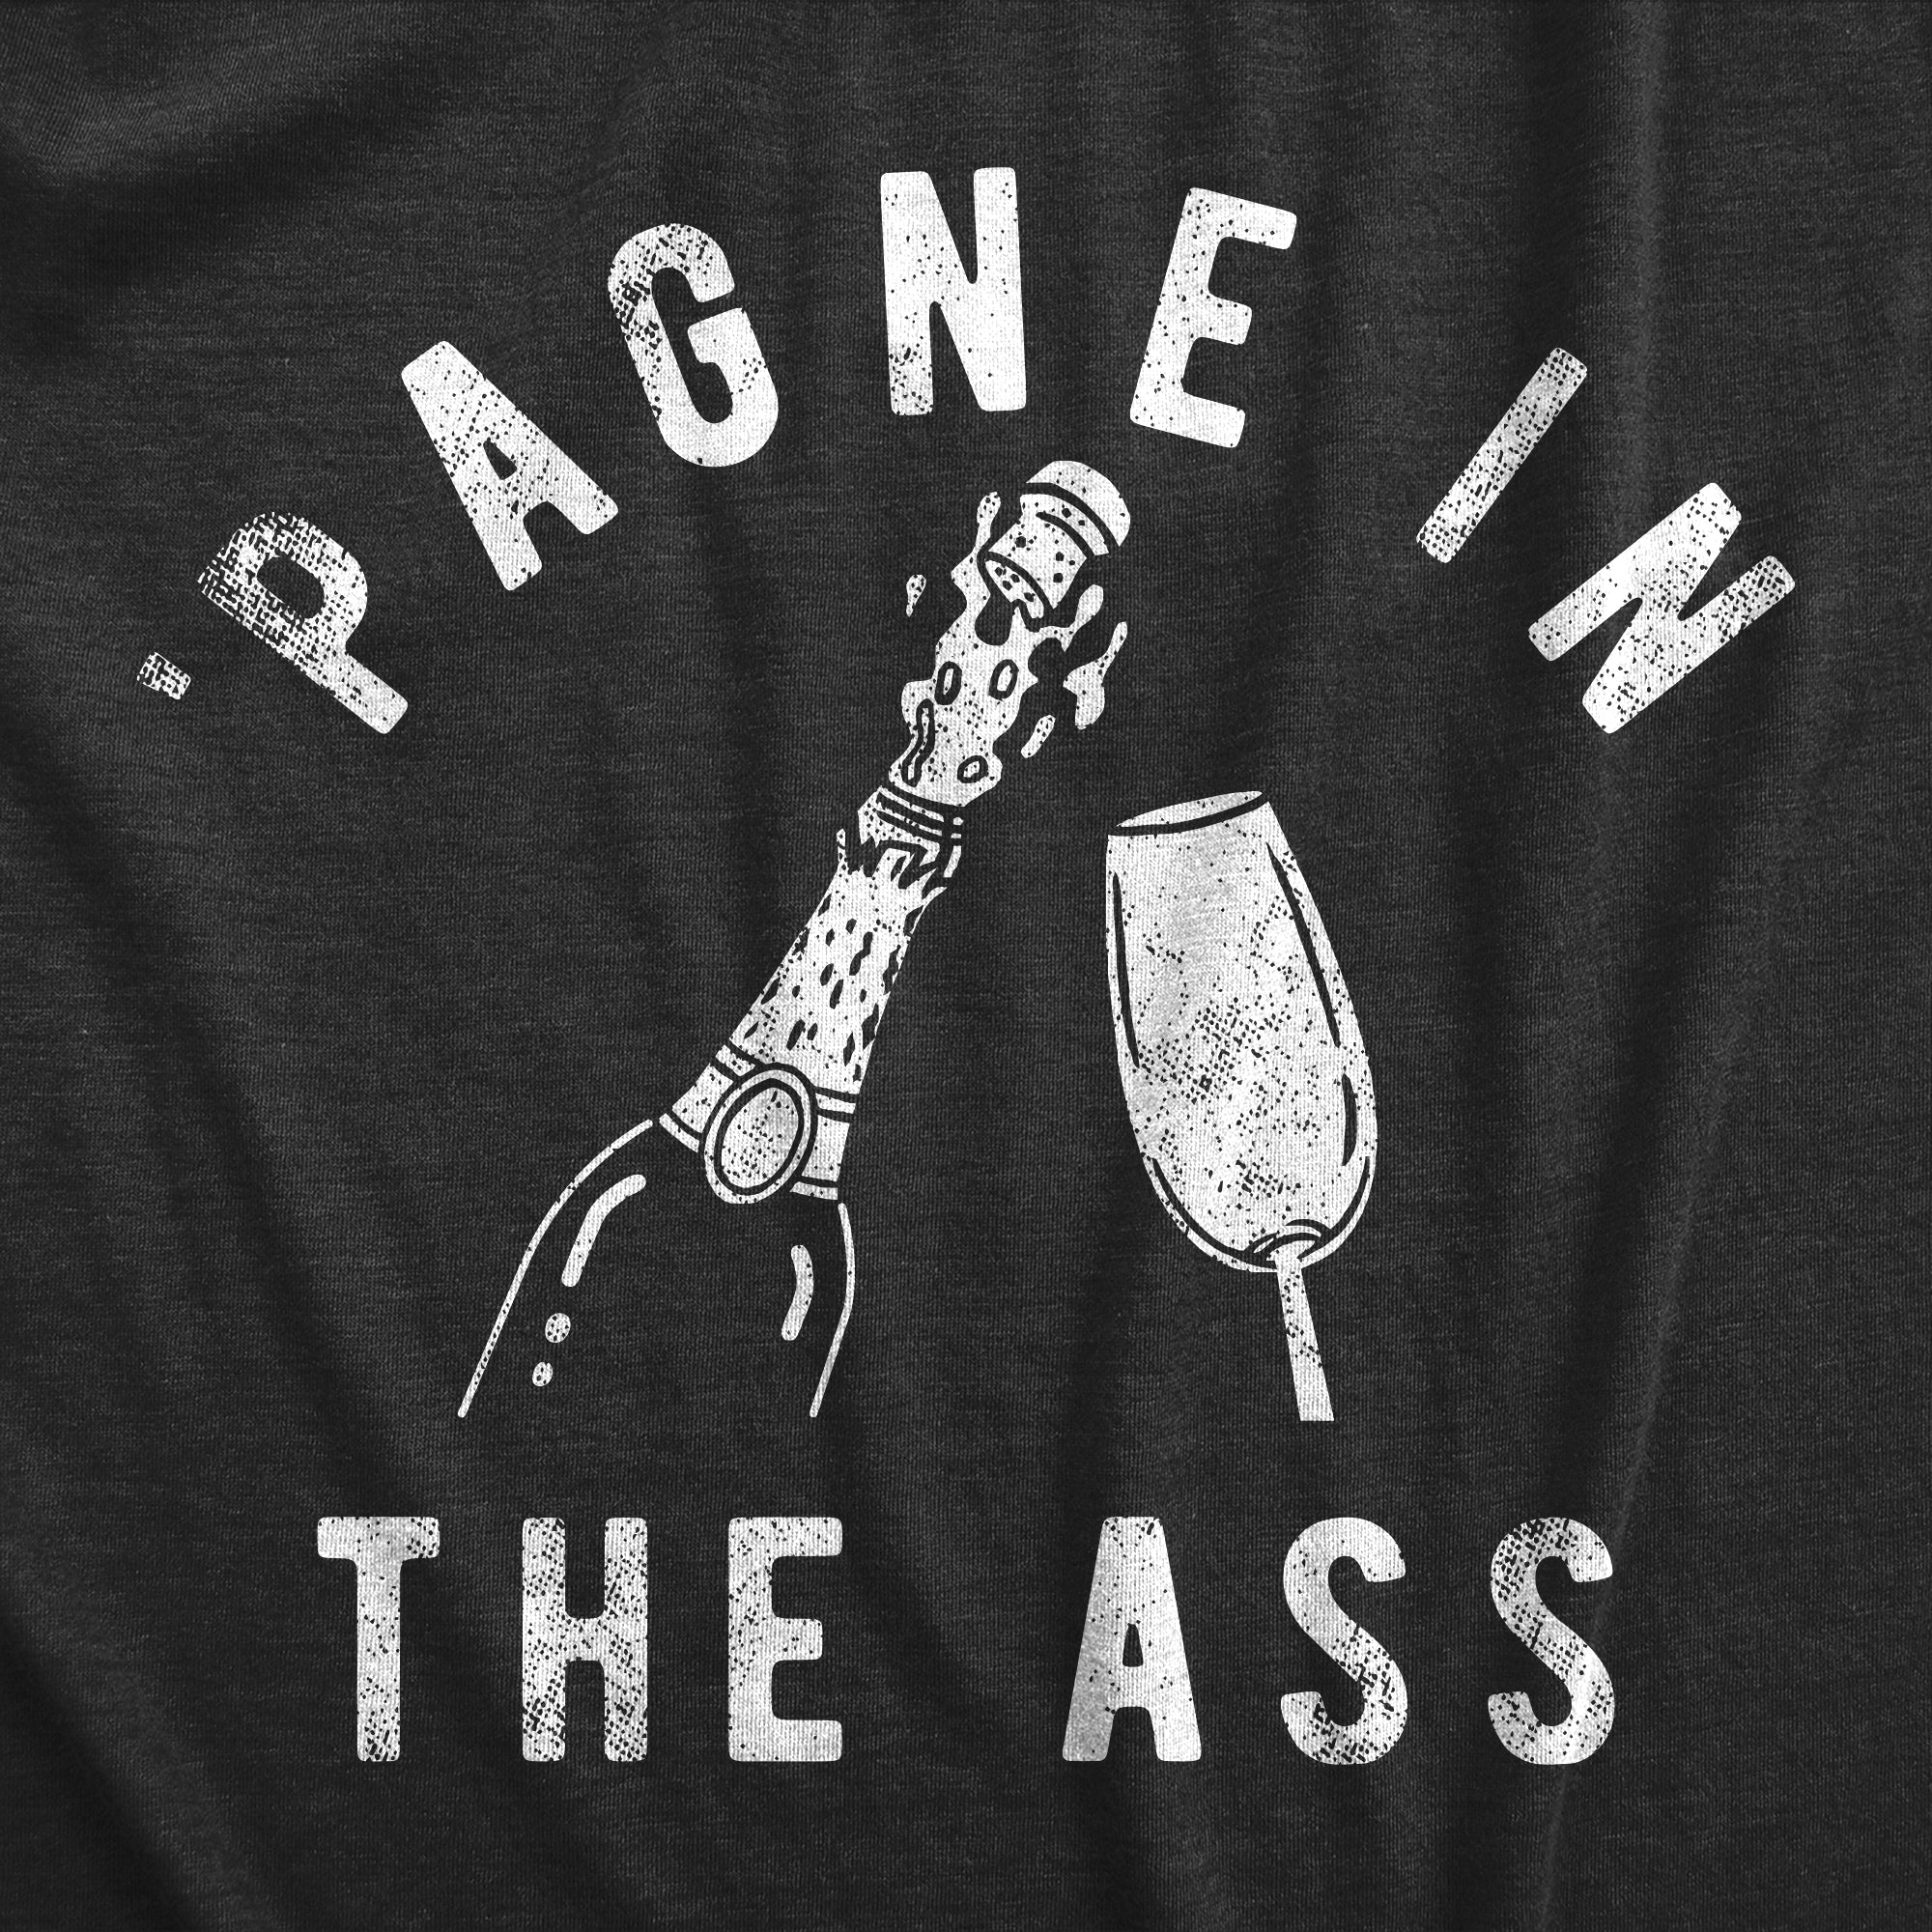 Funny Heather Black - PAGNE Pagne In The Ass Mens T Shirt Nerdy New Years Drinking sarcastic Tee